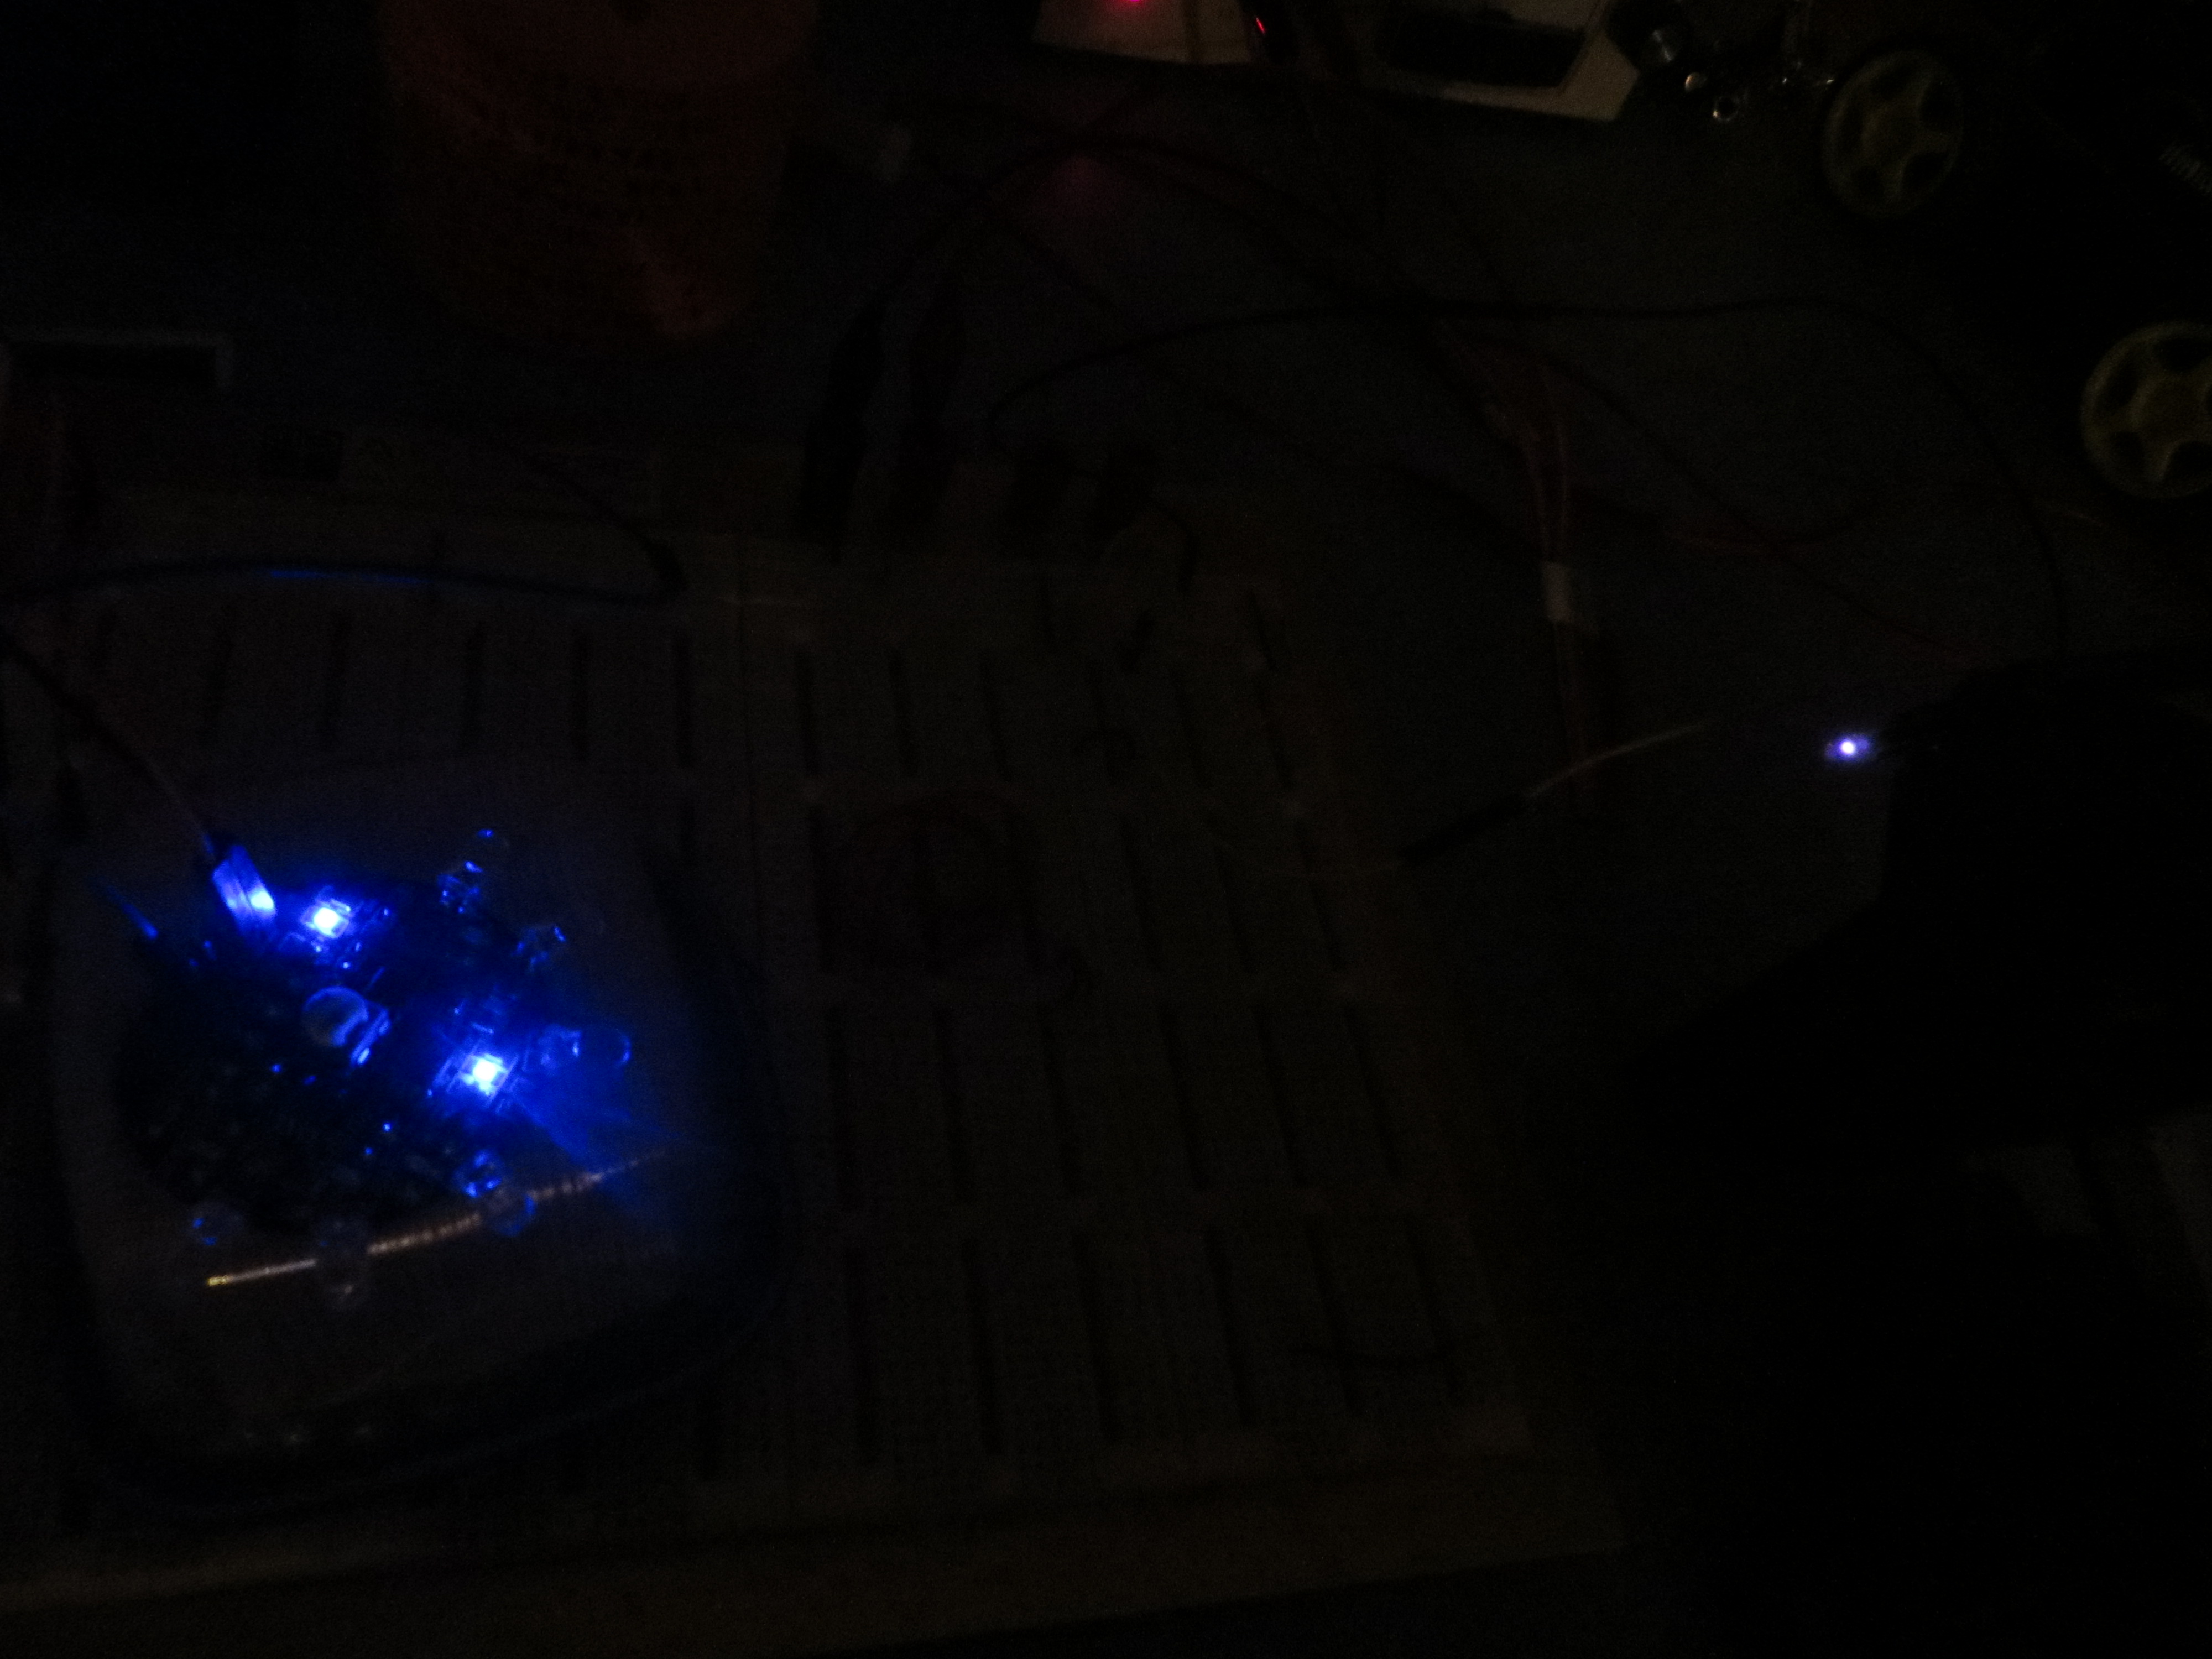 Had to turn off the lights to eliminate IR flooding.  The blue LED at upper left is the power-on indicator.  IR emitter is at far right